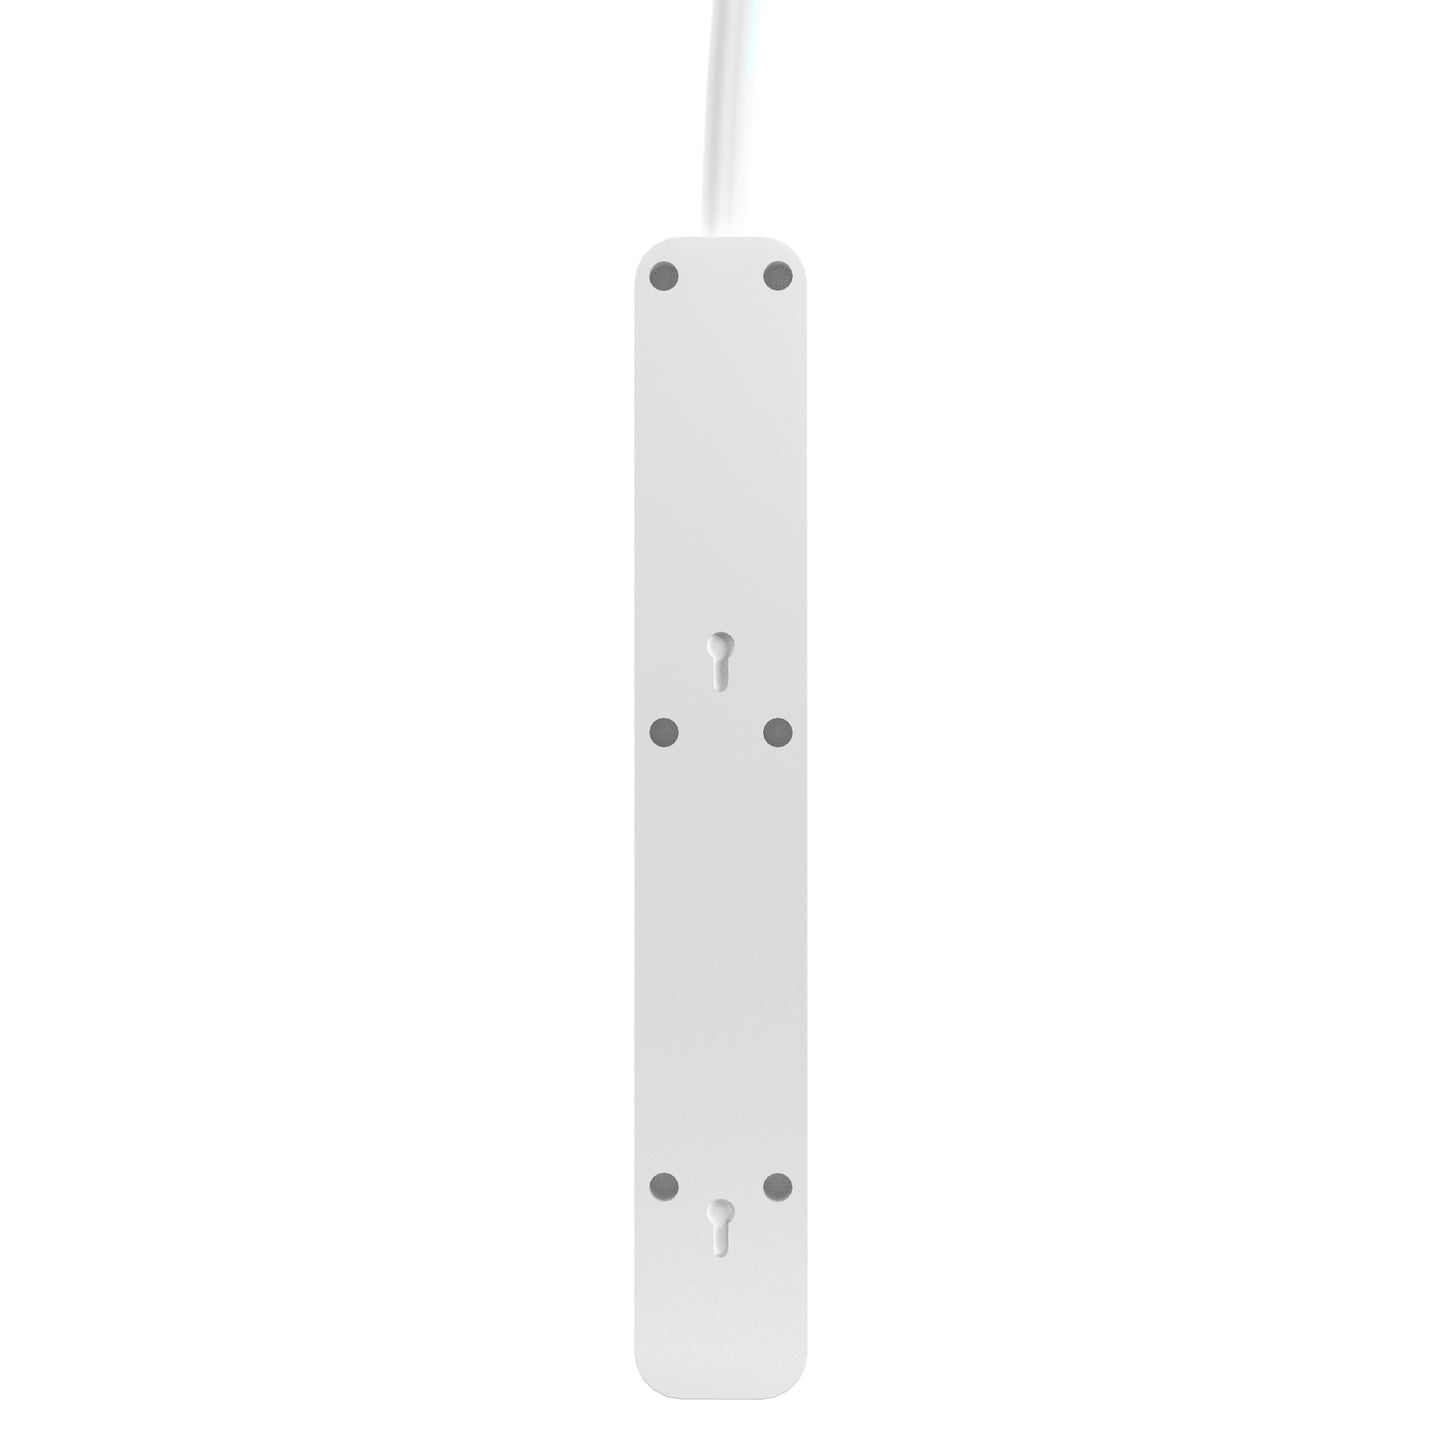 ONE Power 6 Outlet Power Strip with 2 Foot Extension Cord (PS601)